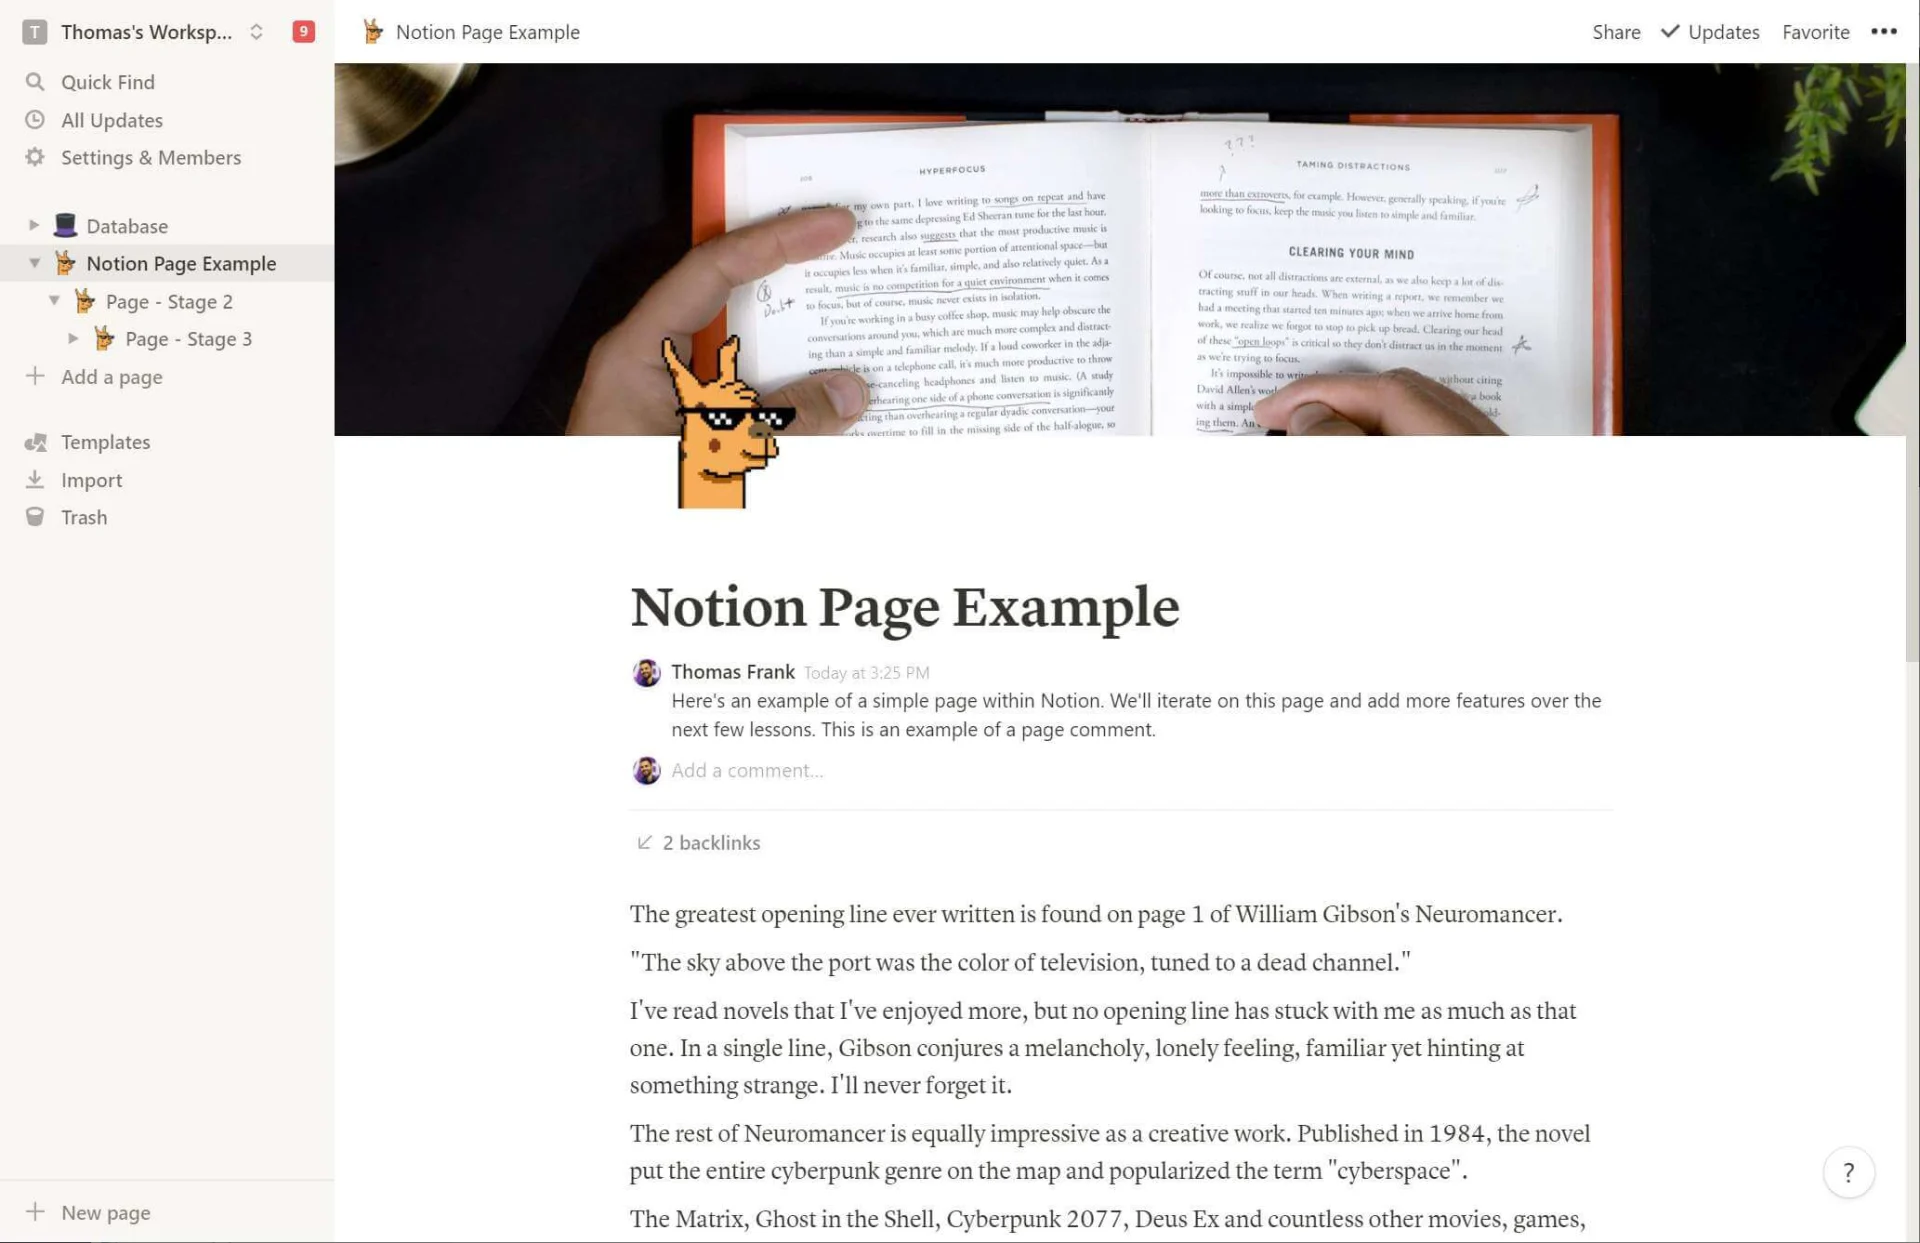 Notion Page example, a place to write date me docs, flexible document creation.